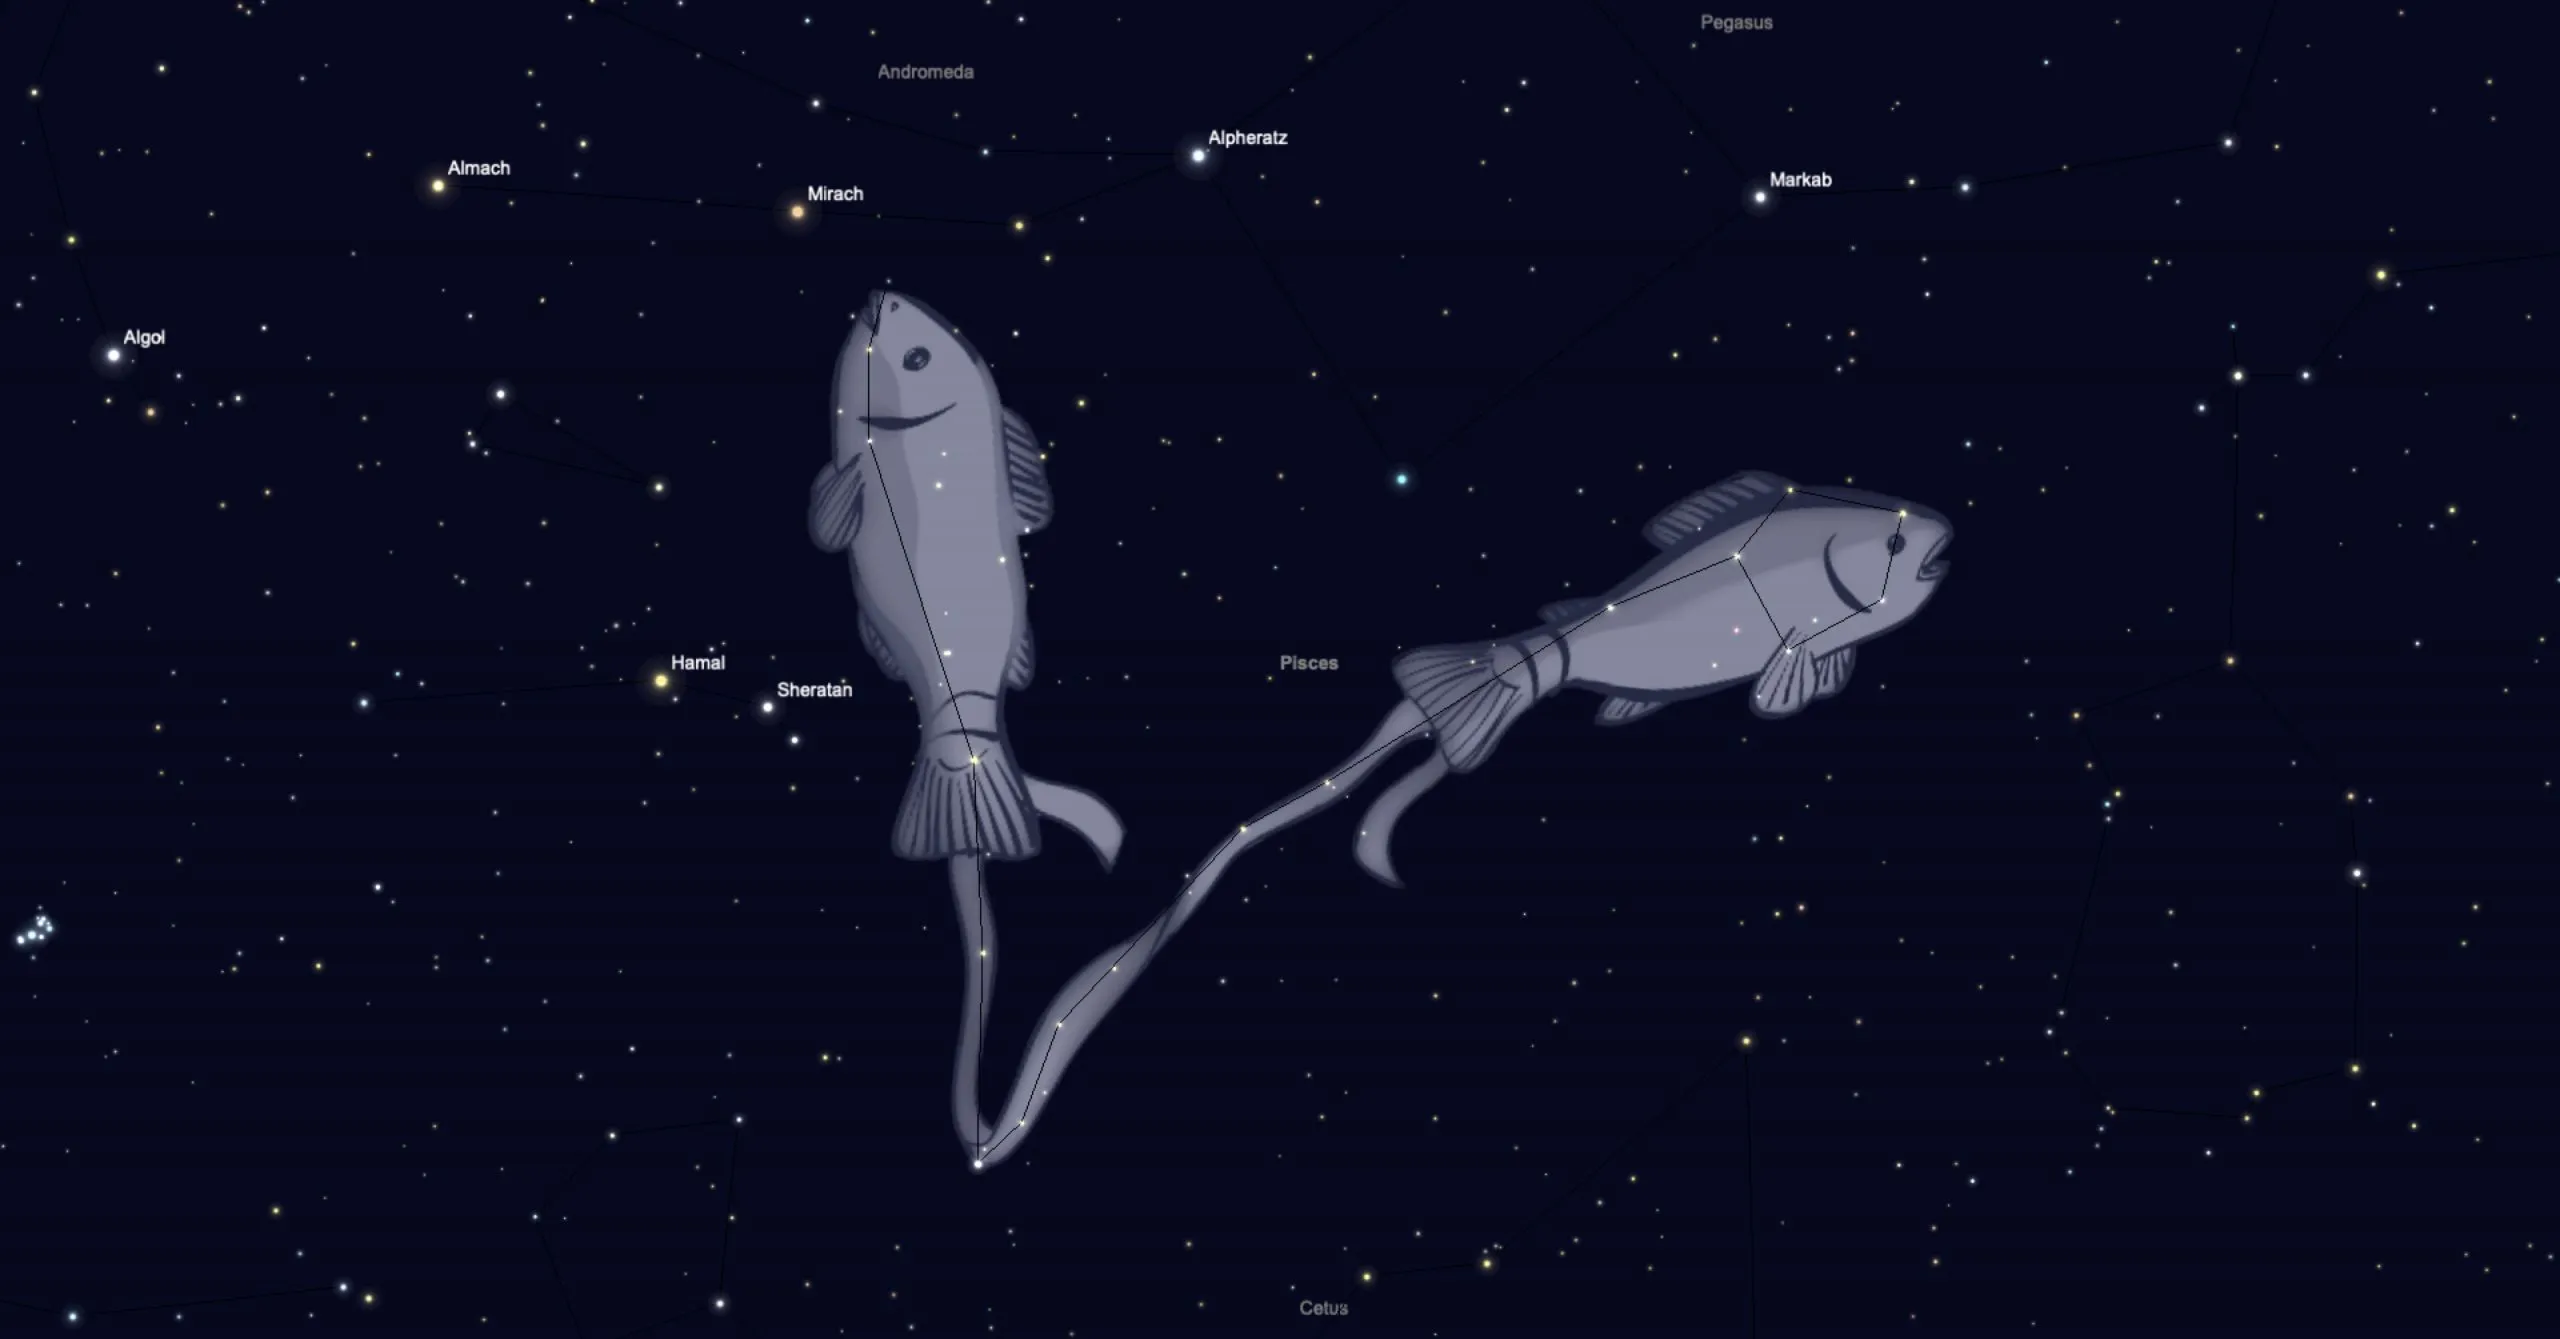 Showing the two fish which make up Pisces constellation